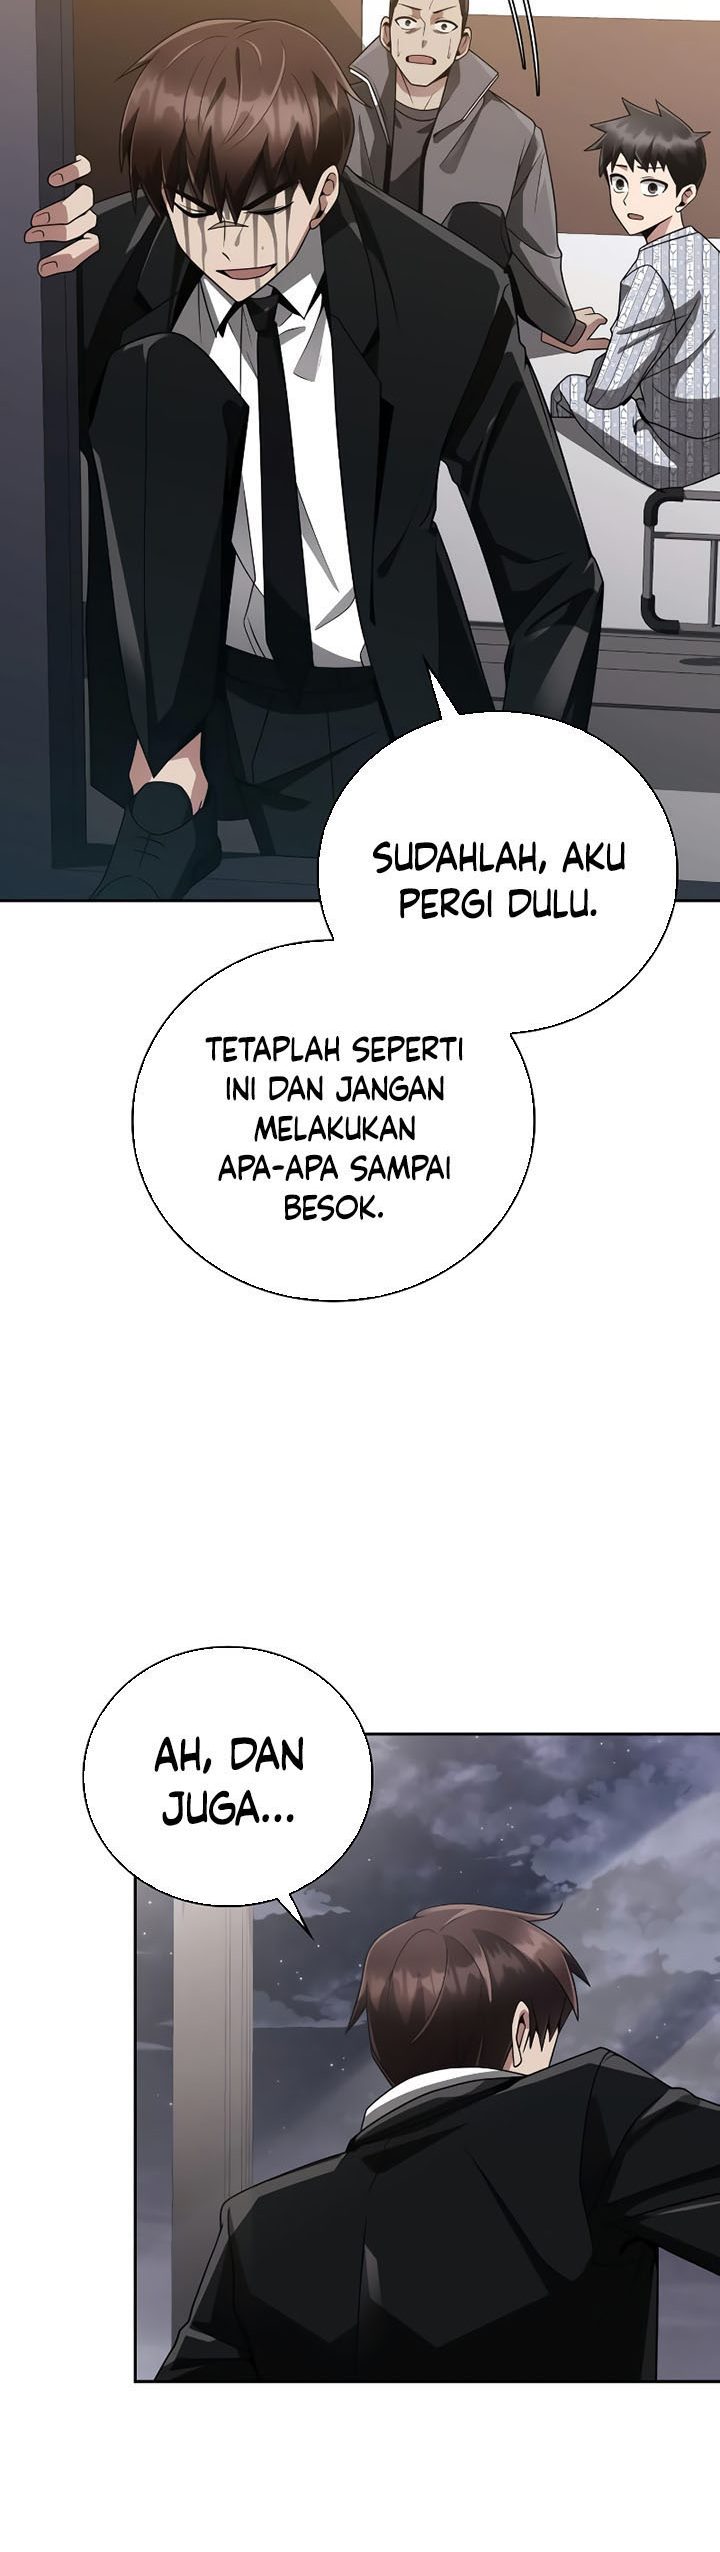 Dilarang COPAS - situs resmi www.mangacanblog.com - Komik clever cleaning life of the returned genius hunter 021 - chapter 21 22 Indonesia clever cleaning life of the returned genius hunter 021 - chapter 21 Terbaru 27|Baca Manga Komik Indonesia|Mangacan